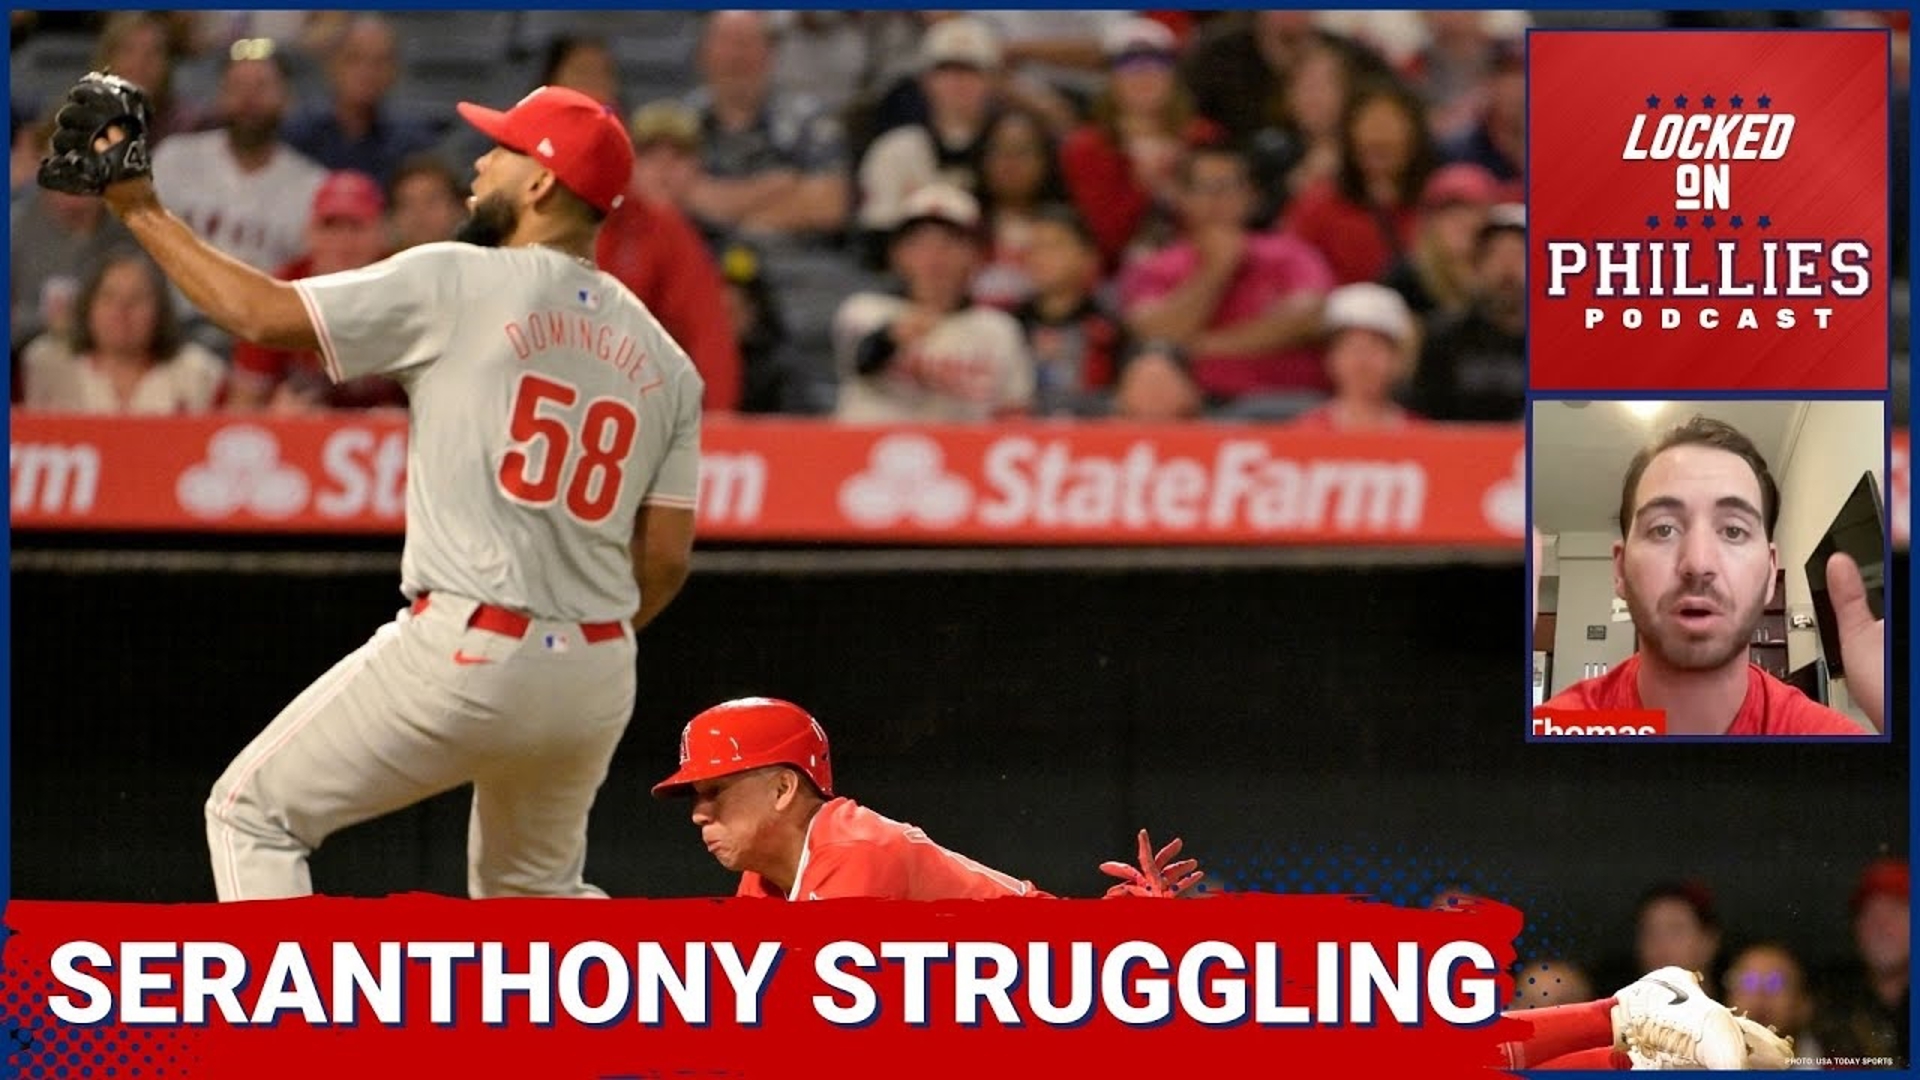 In today's episode, Connor discusses the Philadelphia Phillies' loss in game 1 of their series out in Anaheim against the Los Angeles Angels.